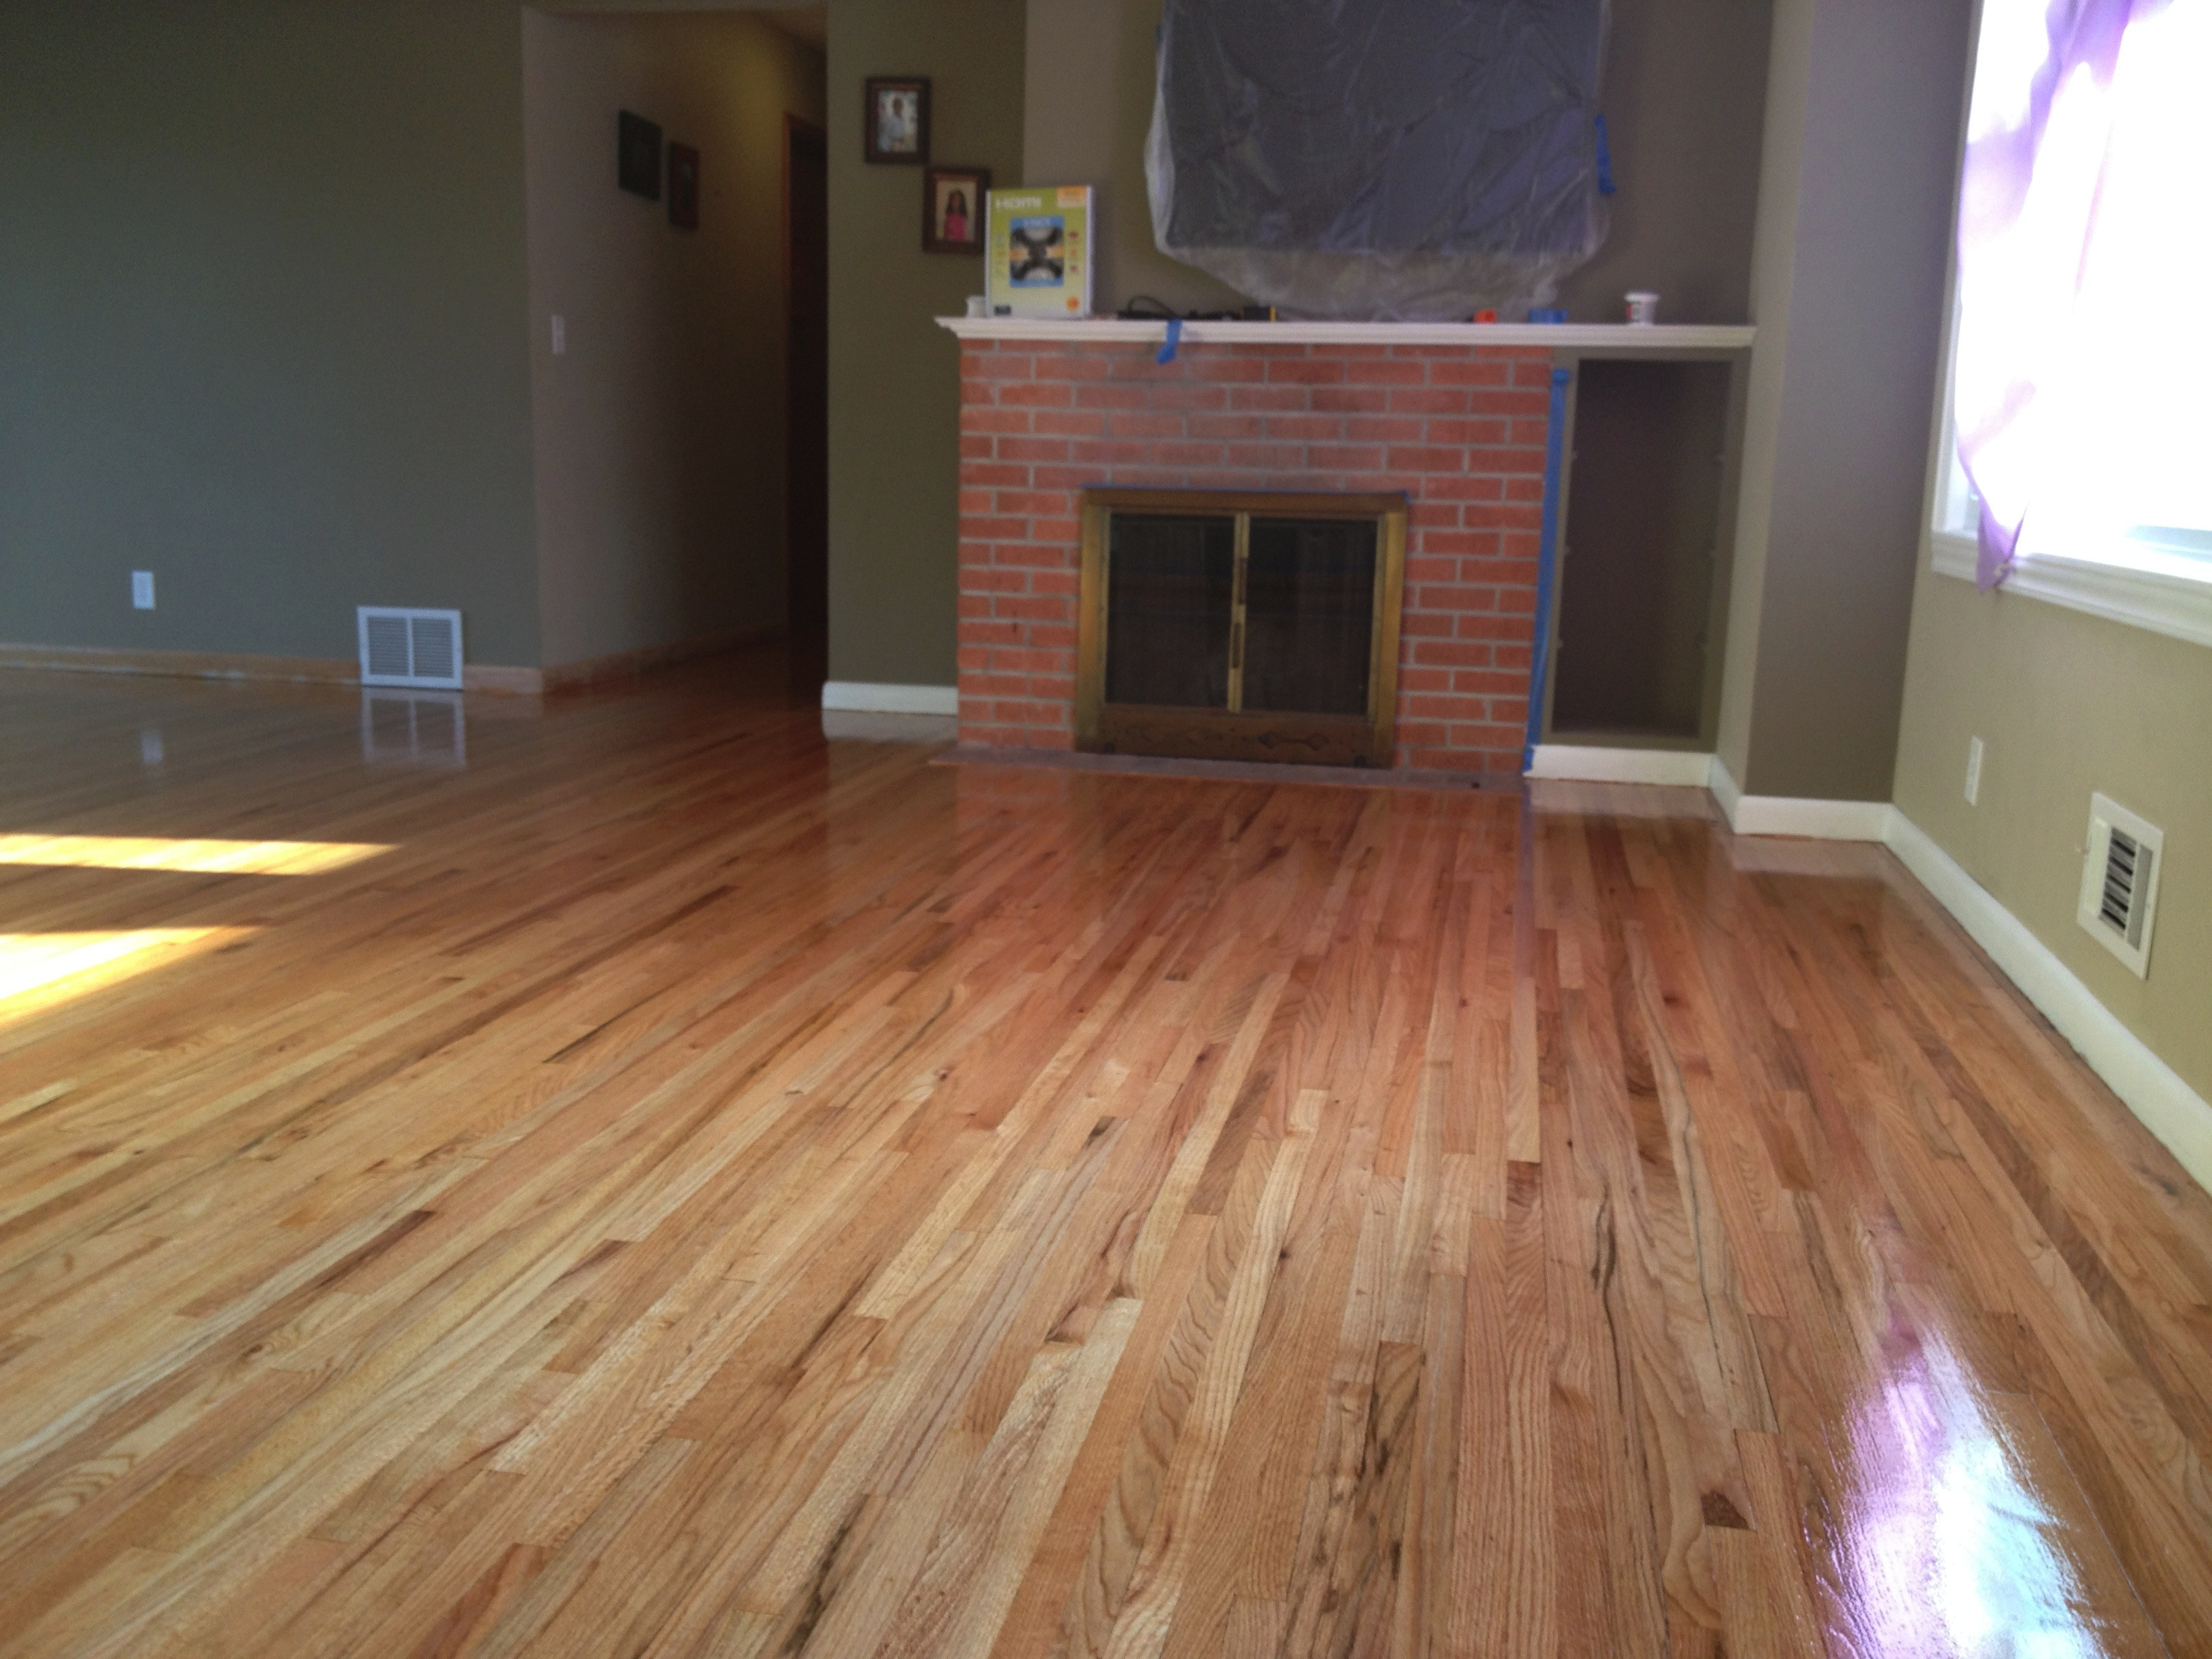 25 Nice How Much Does Restaining Hardwood Floors Cost 2022 free download how much does restaining hardwood floors cost of image 6586 from post restoring old hardwood floors will with inside easy hardwood floor refinishing kitchen set restoring old floors will flo